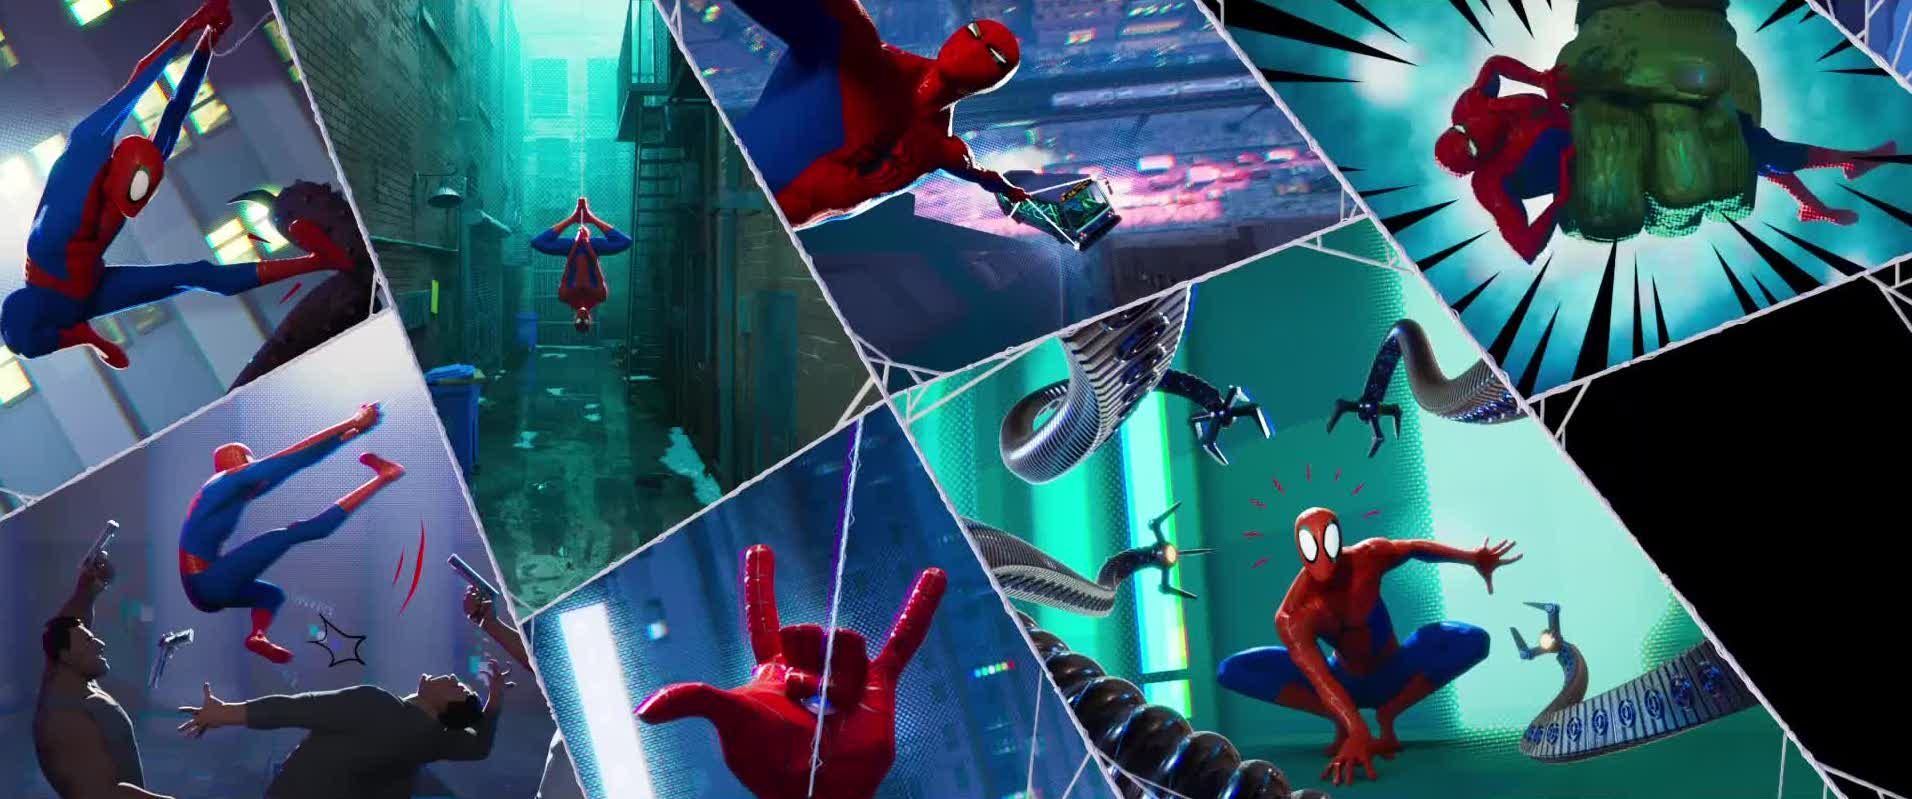 Spider Man: Into The Spider Verse Required Inventing A New Kind